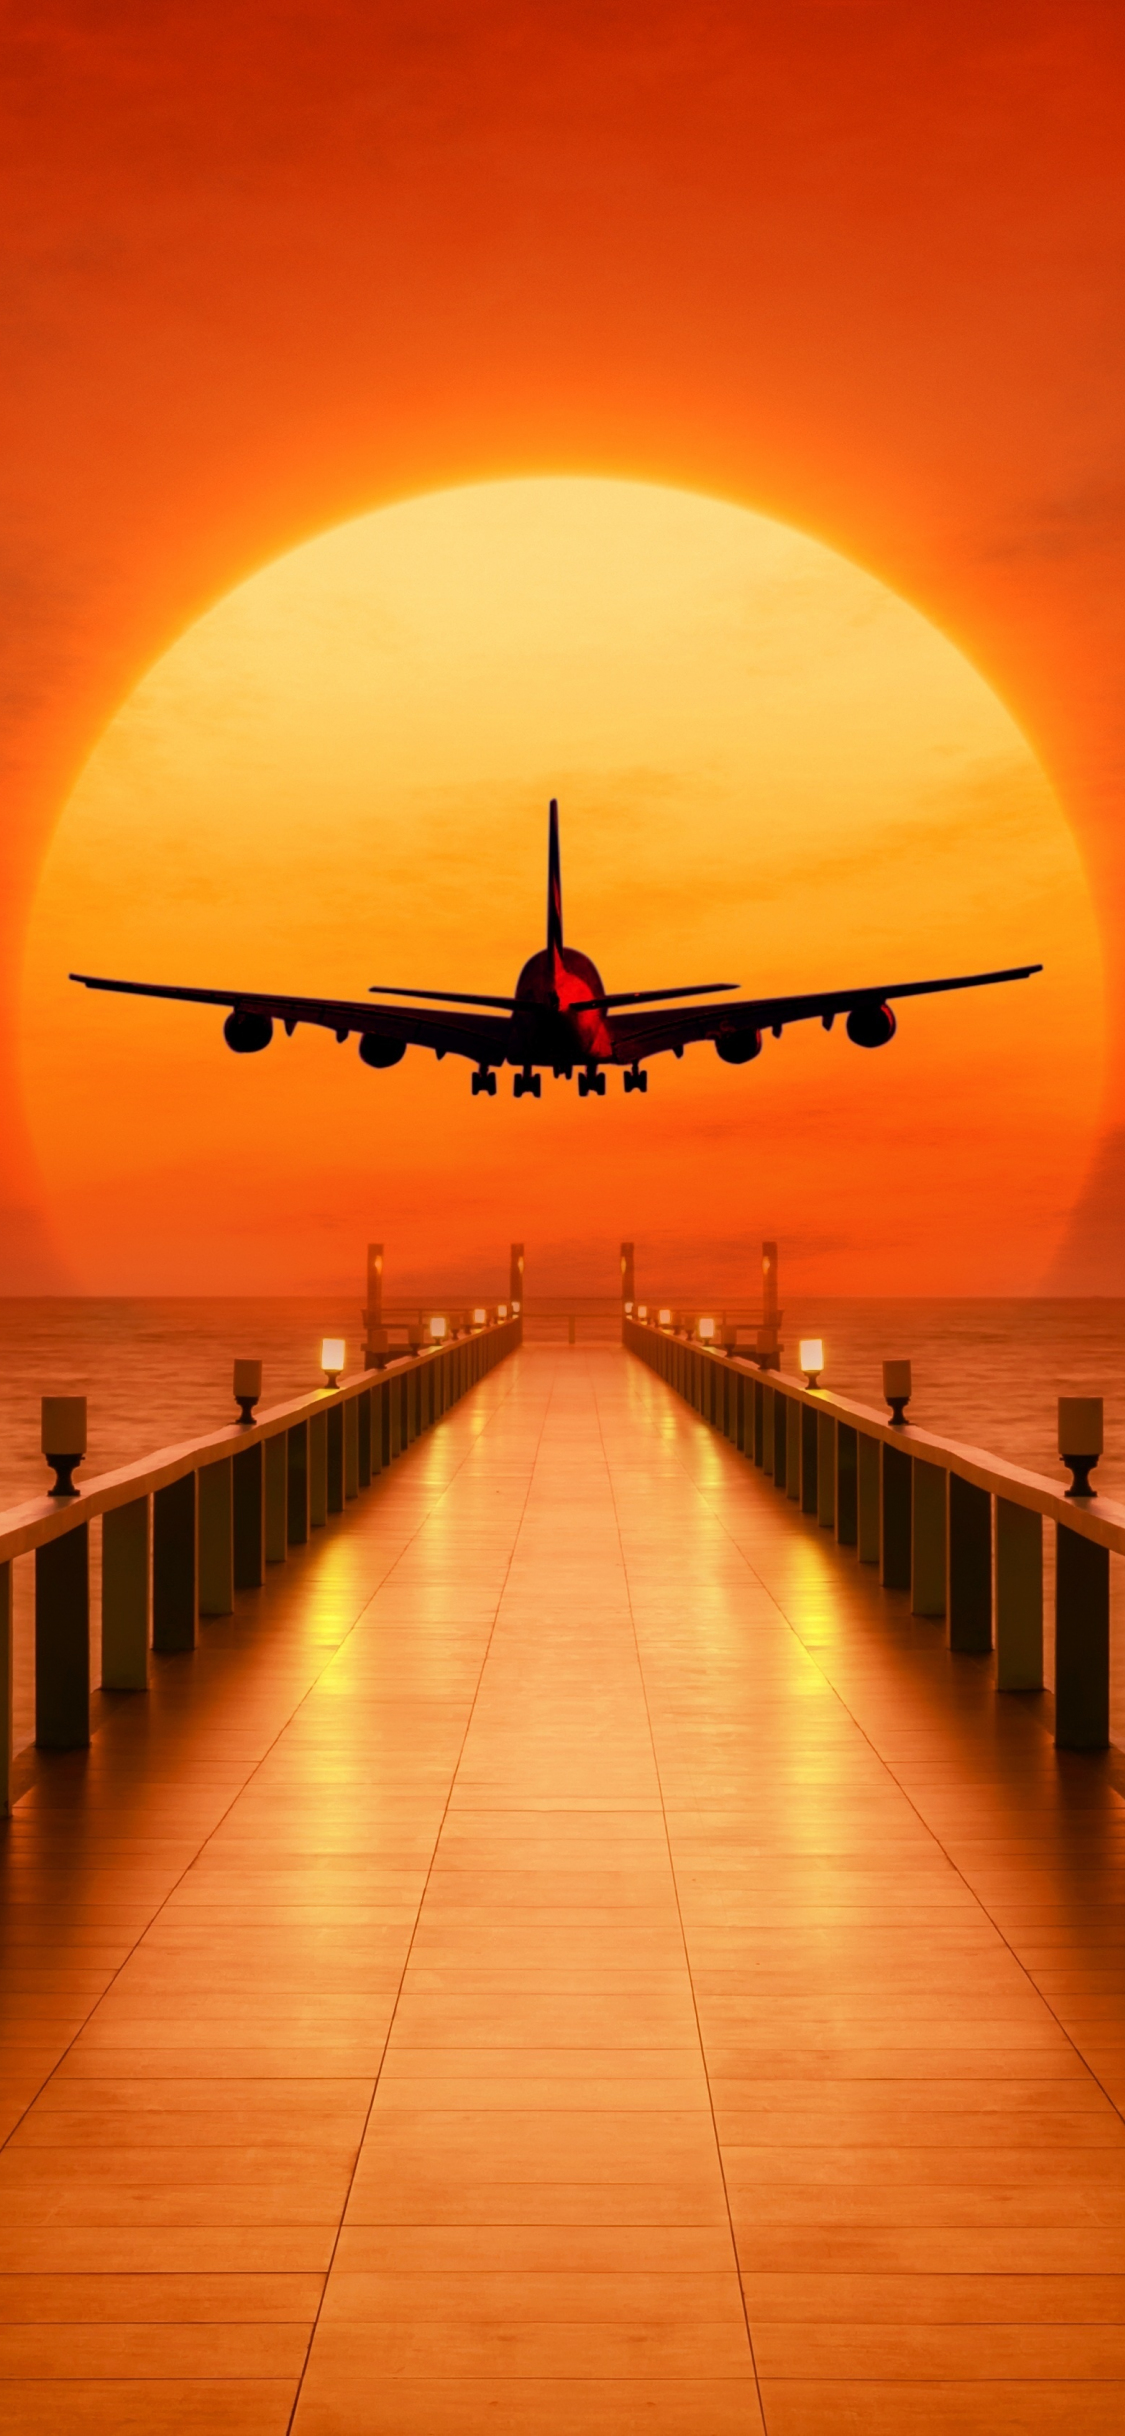 Download wallpaper 1125x2436 airplane, photoshop, pier, sunset, iphone x,  1125x2436 hd background, 4700